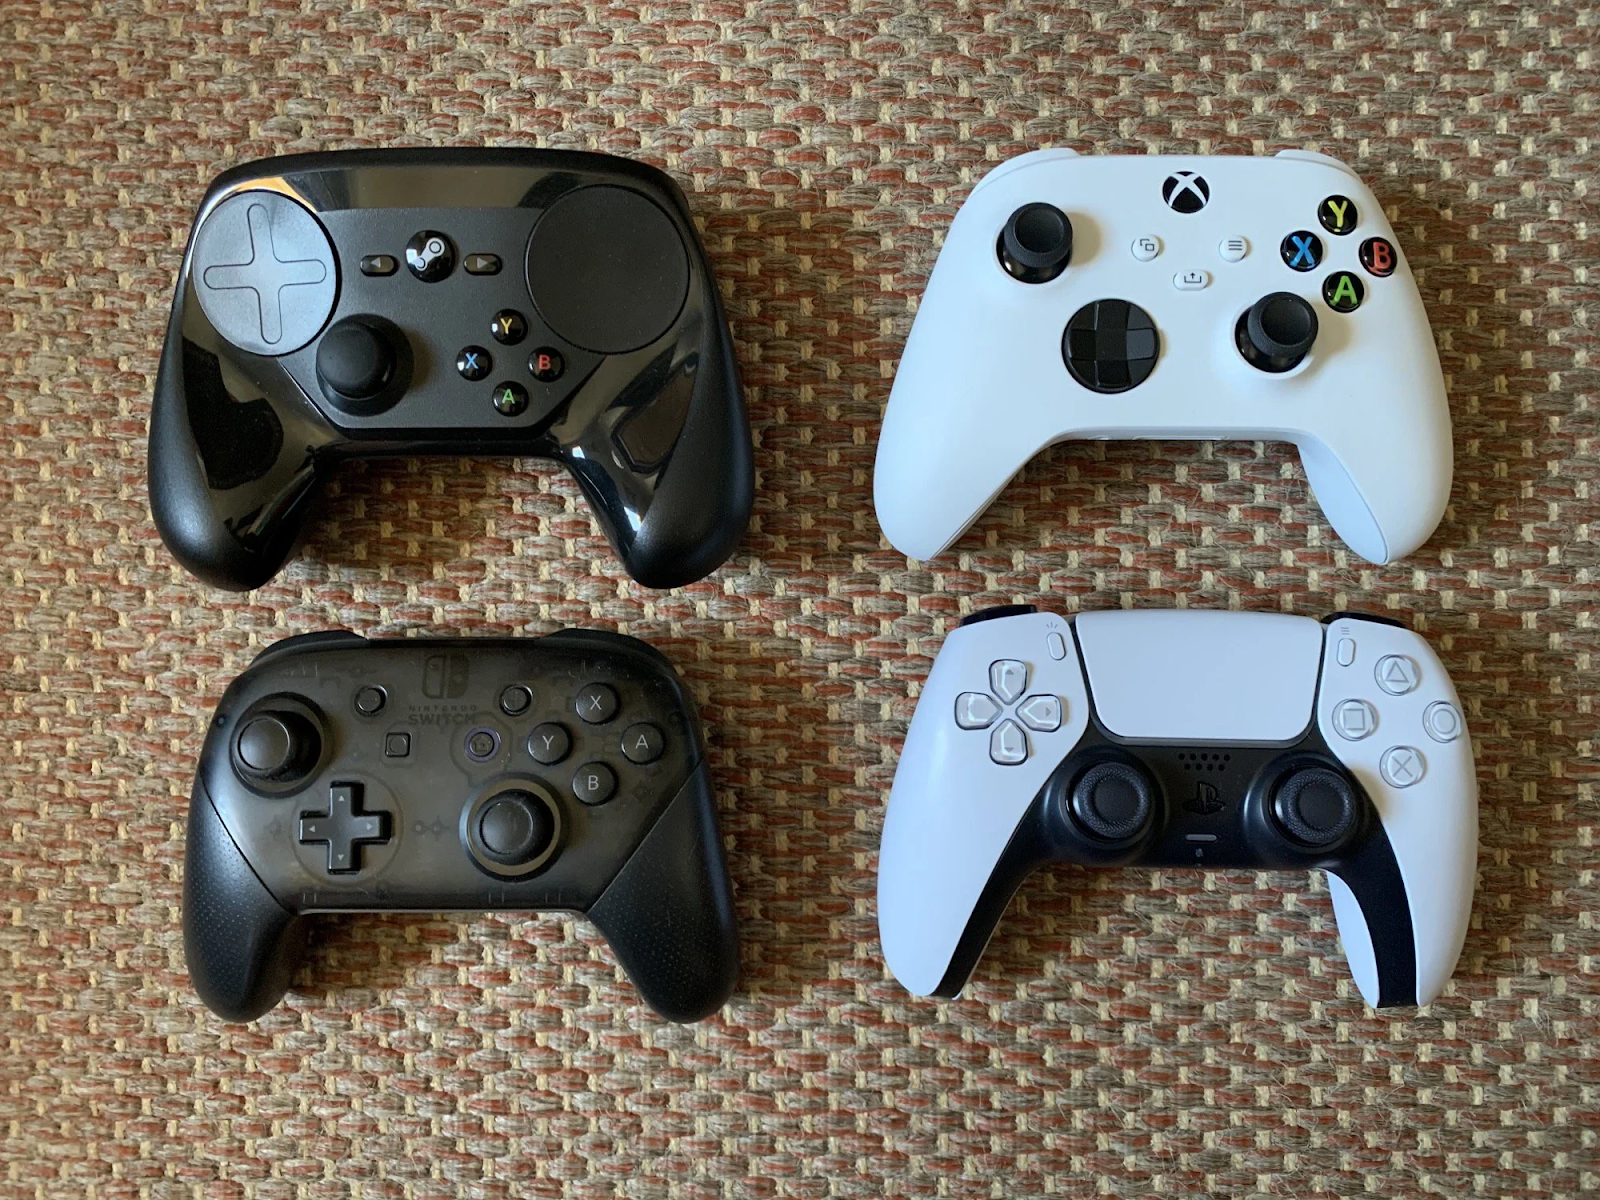 Modern controllers are designed for optimal comfort and accessibility. 